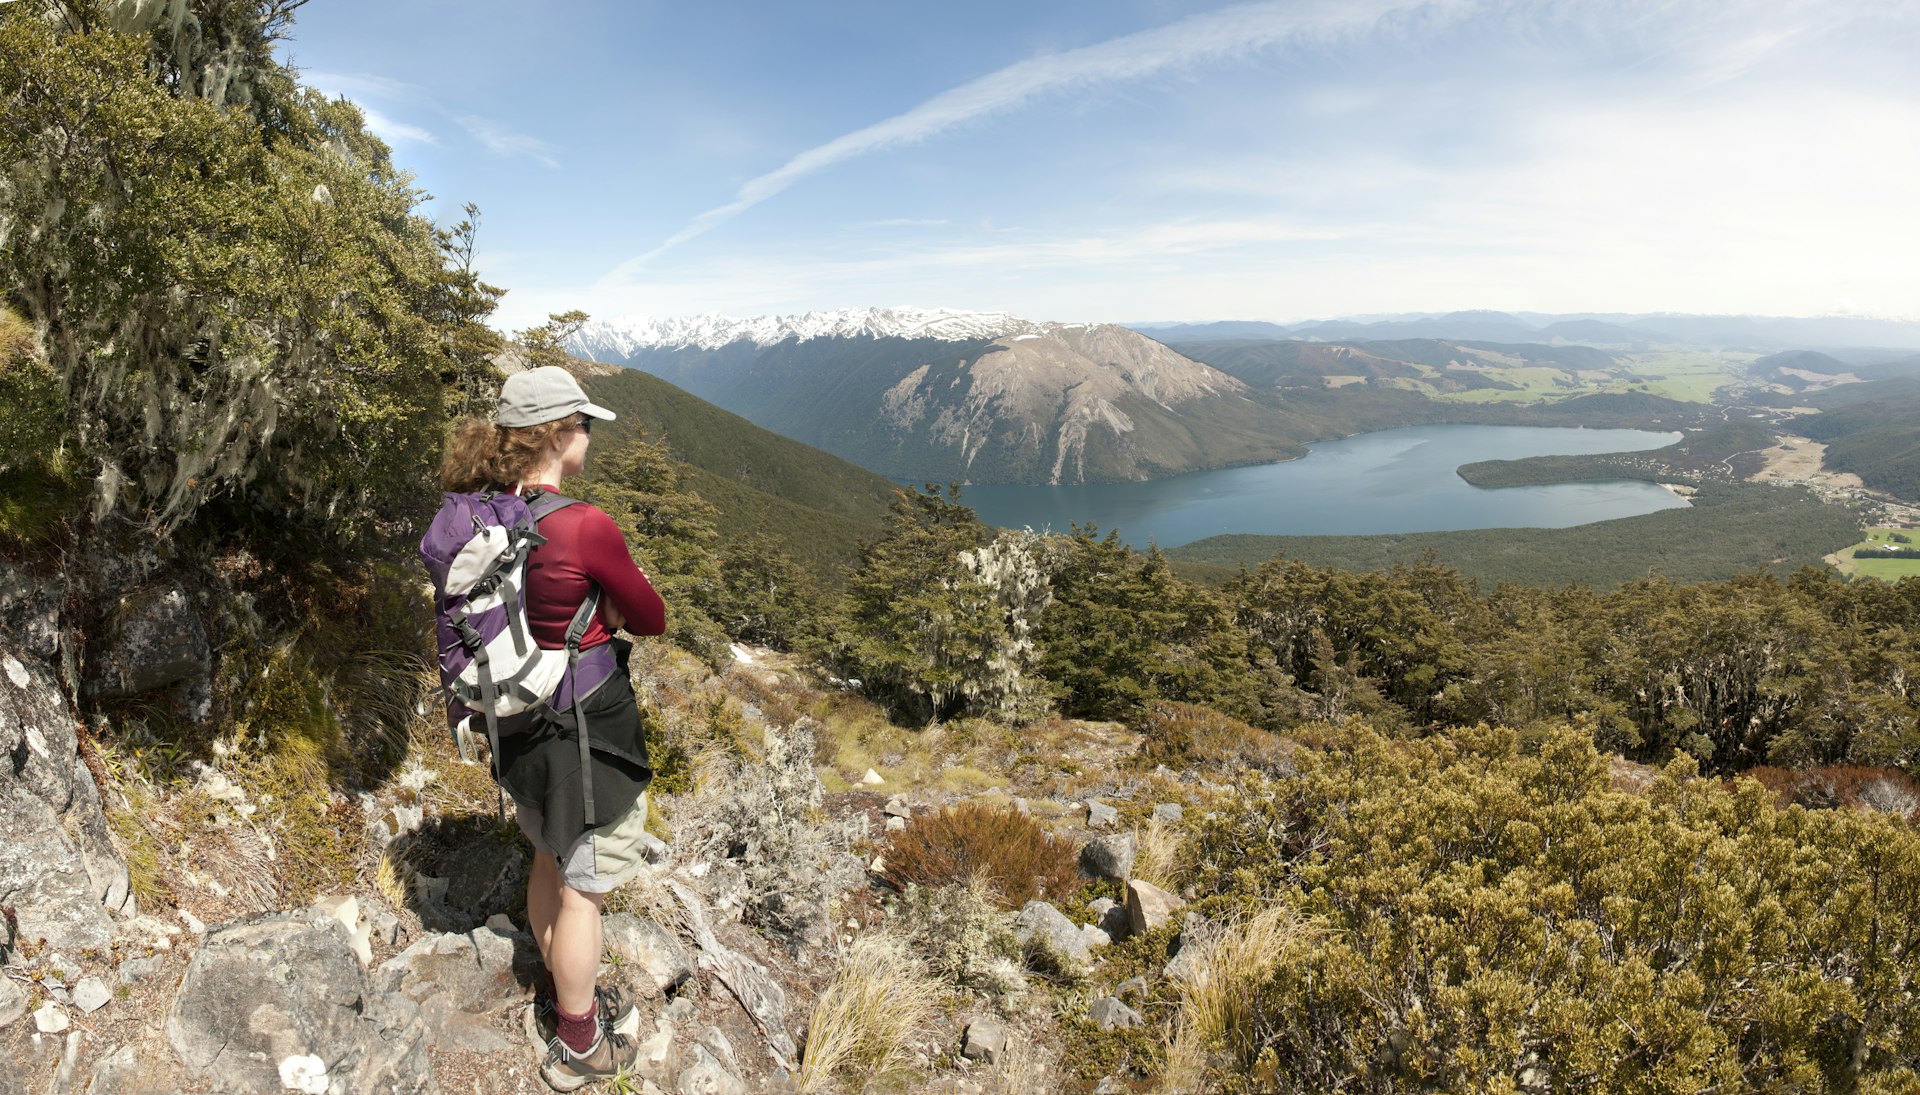 A walker admiring the view of Lake Rotoiti from the St. Arnaud Range in the Nelson Lakes National Park.